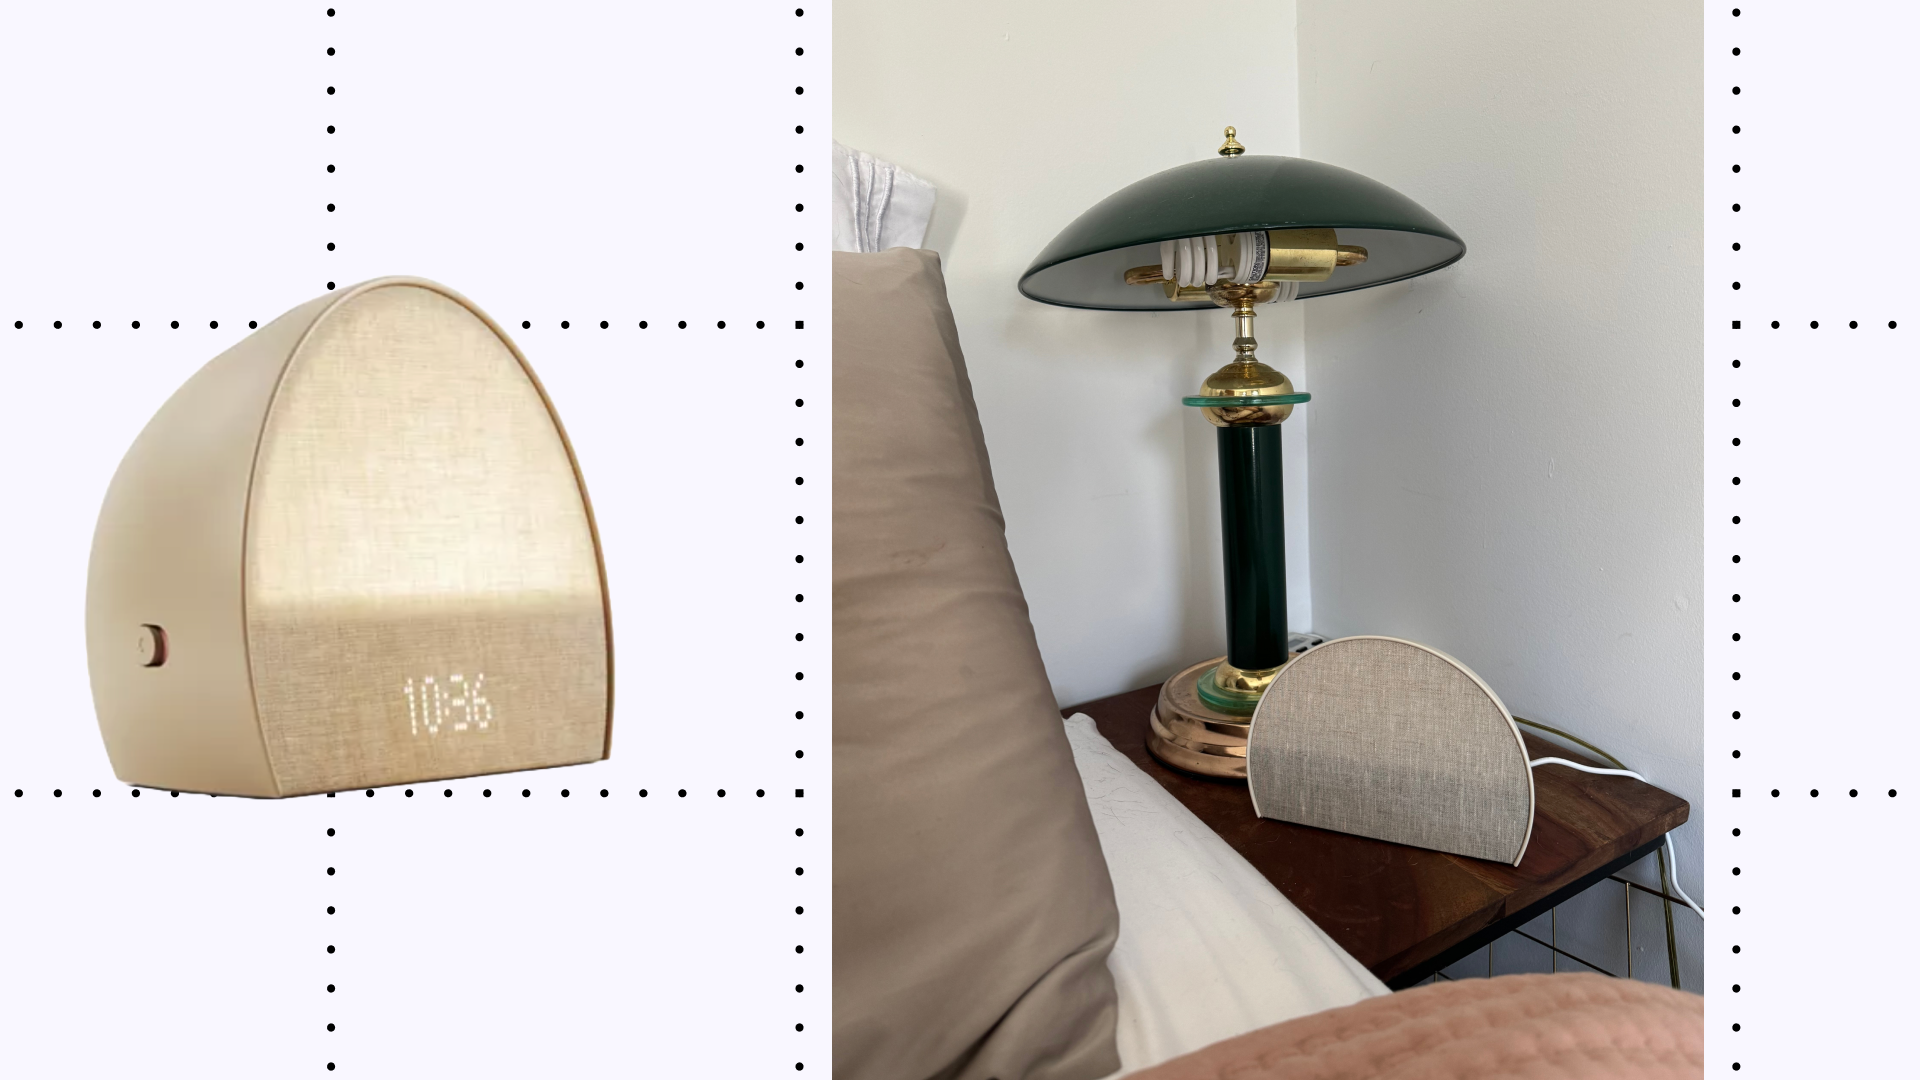 An image of the Hatch Restore 2 on a nightstand beside a green lamp next to a product image of the Hatch Restore 2